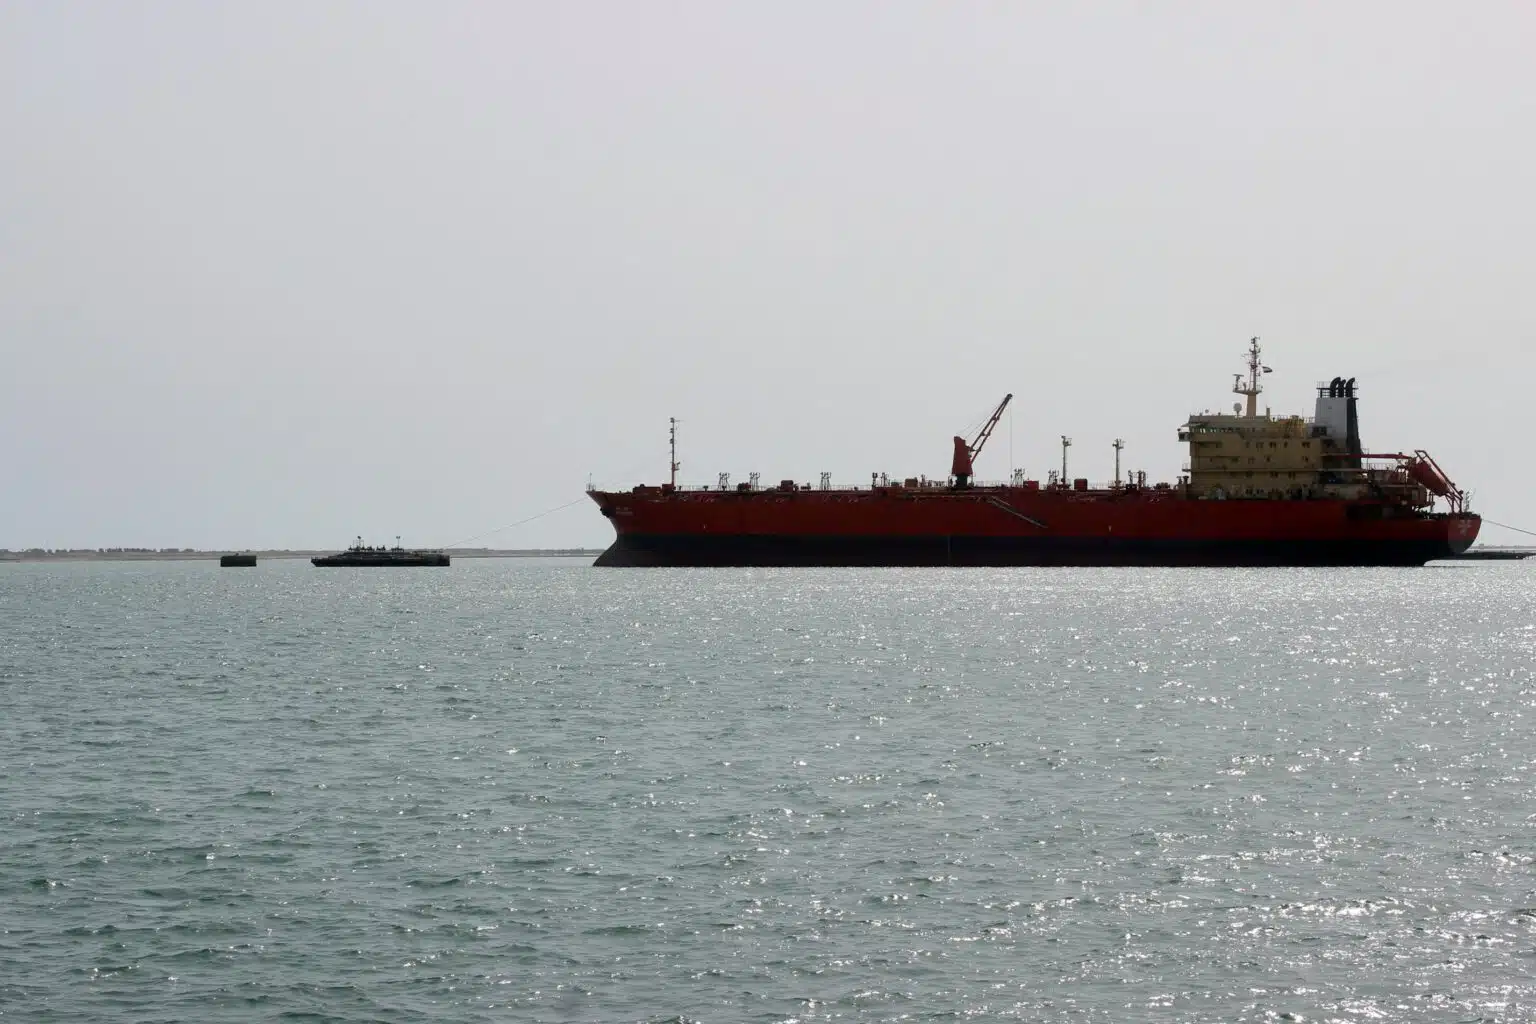 UN Purchased Supertanker Sailed To Prevent Disaster.